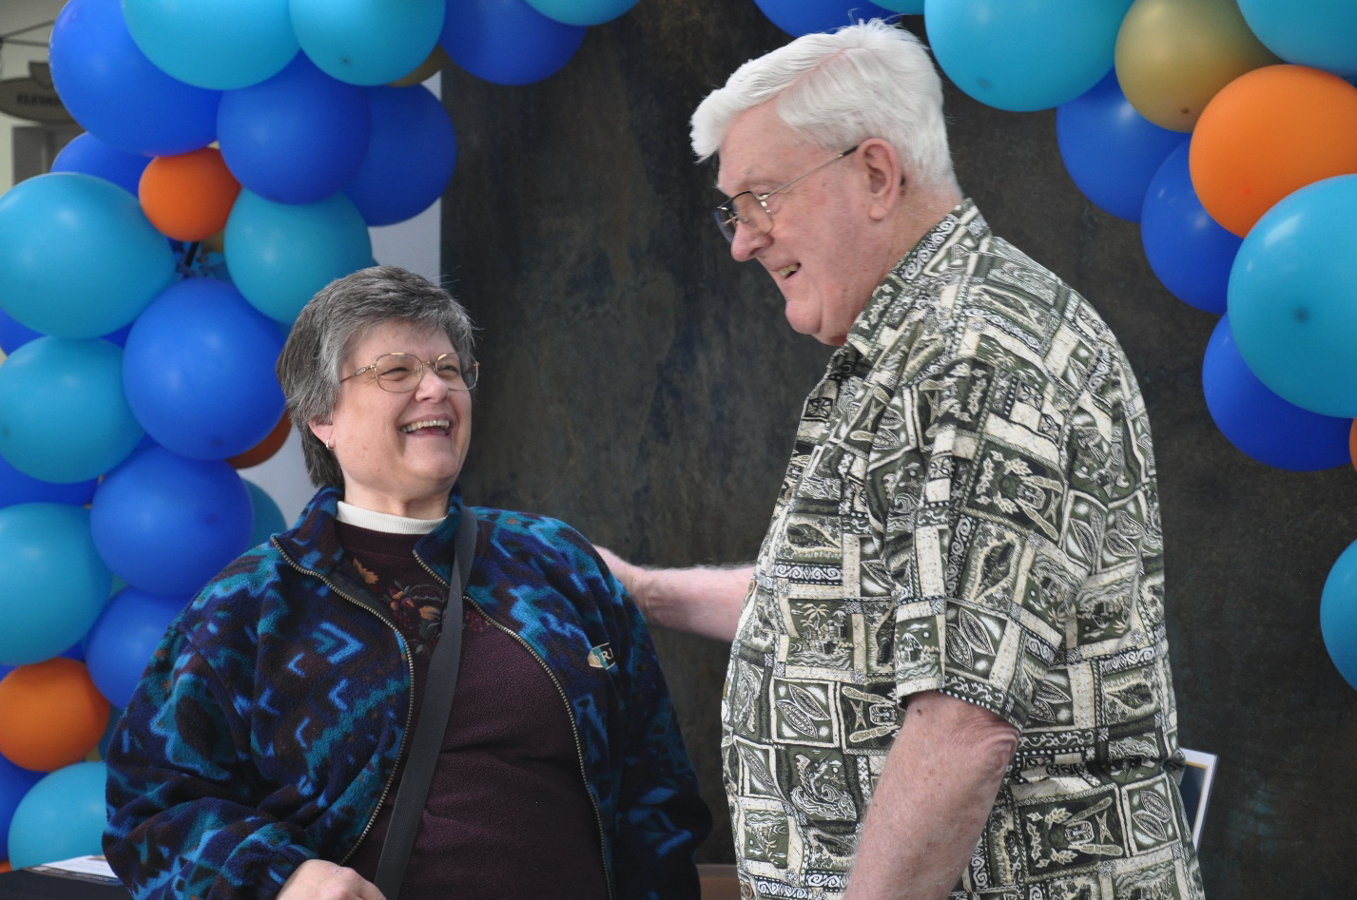 Two seniors, a man and a woman, laugh together under a balloon arch